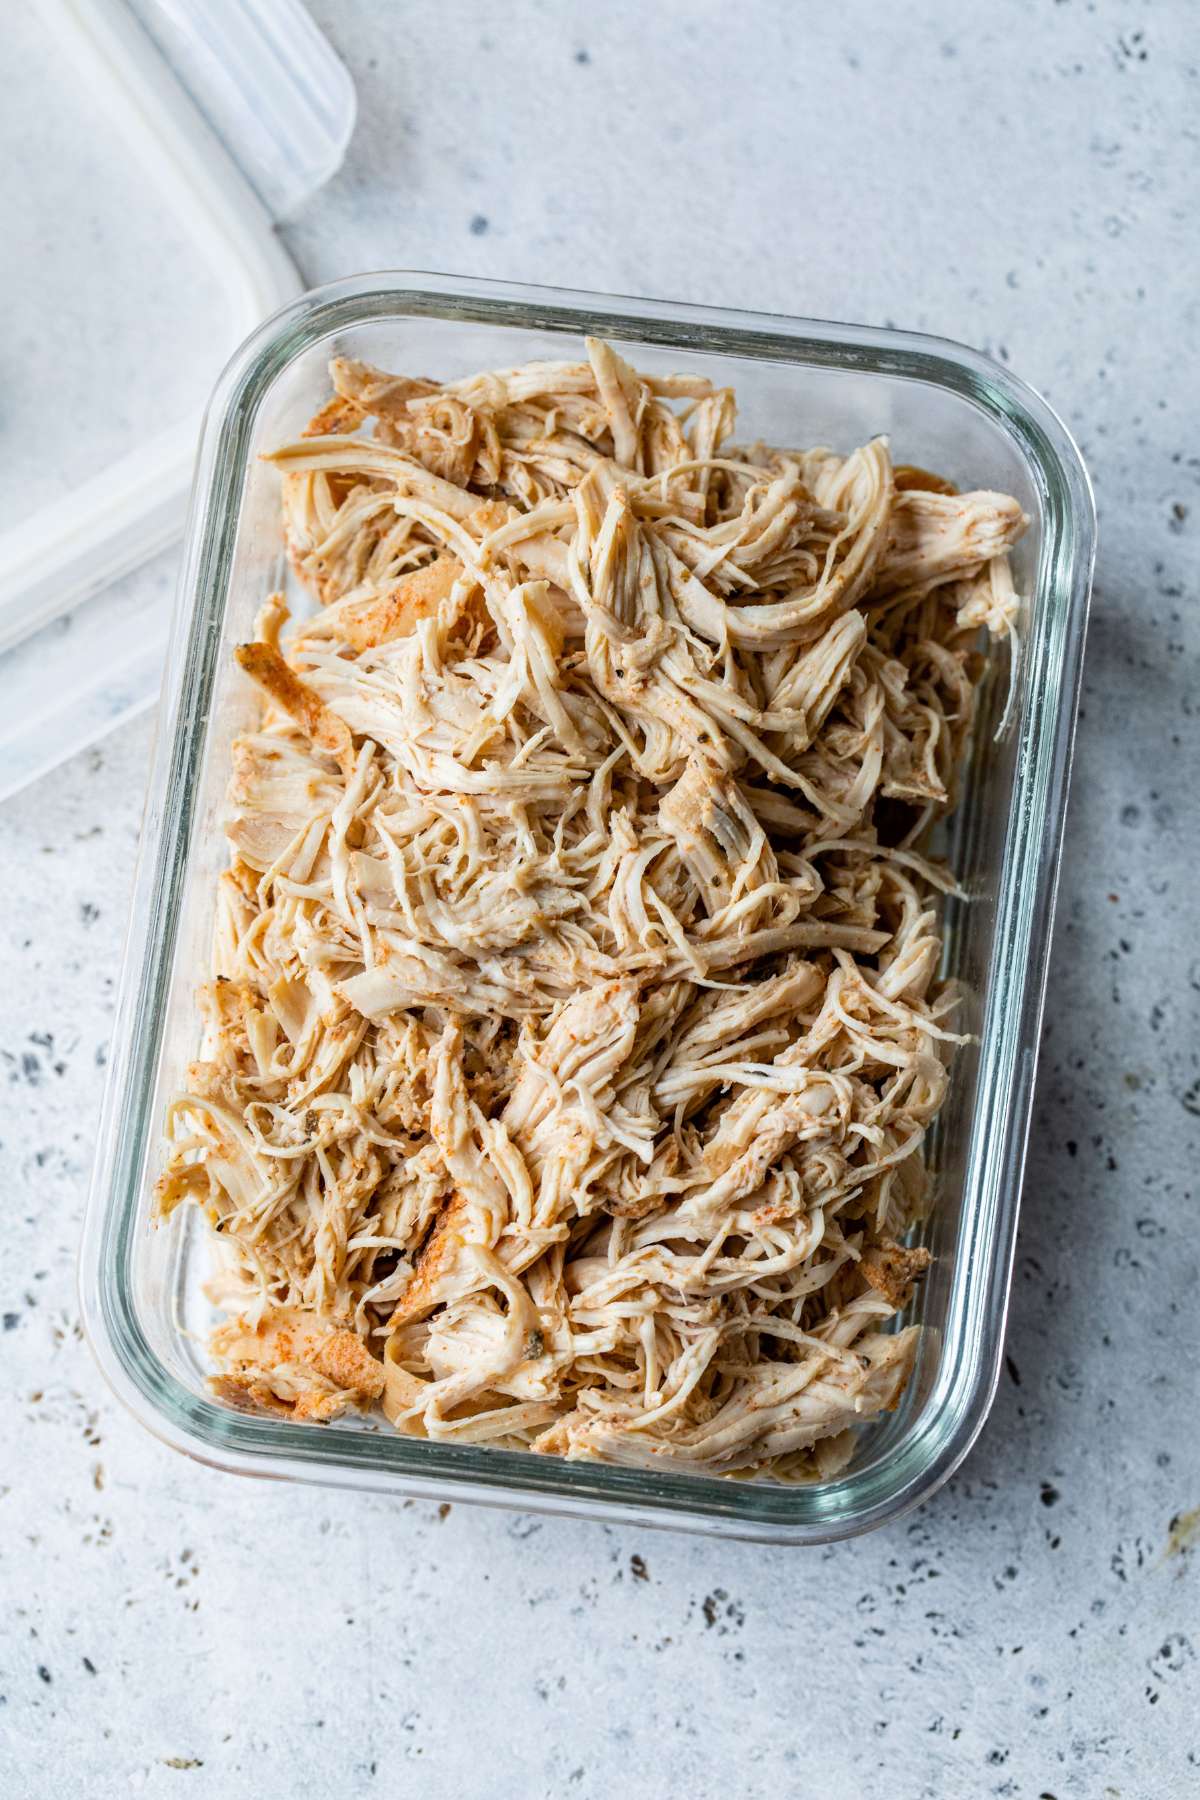 Shredded chicken in a meal prep storage container.